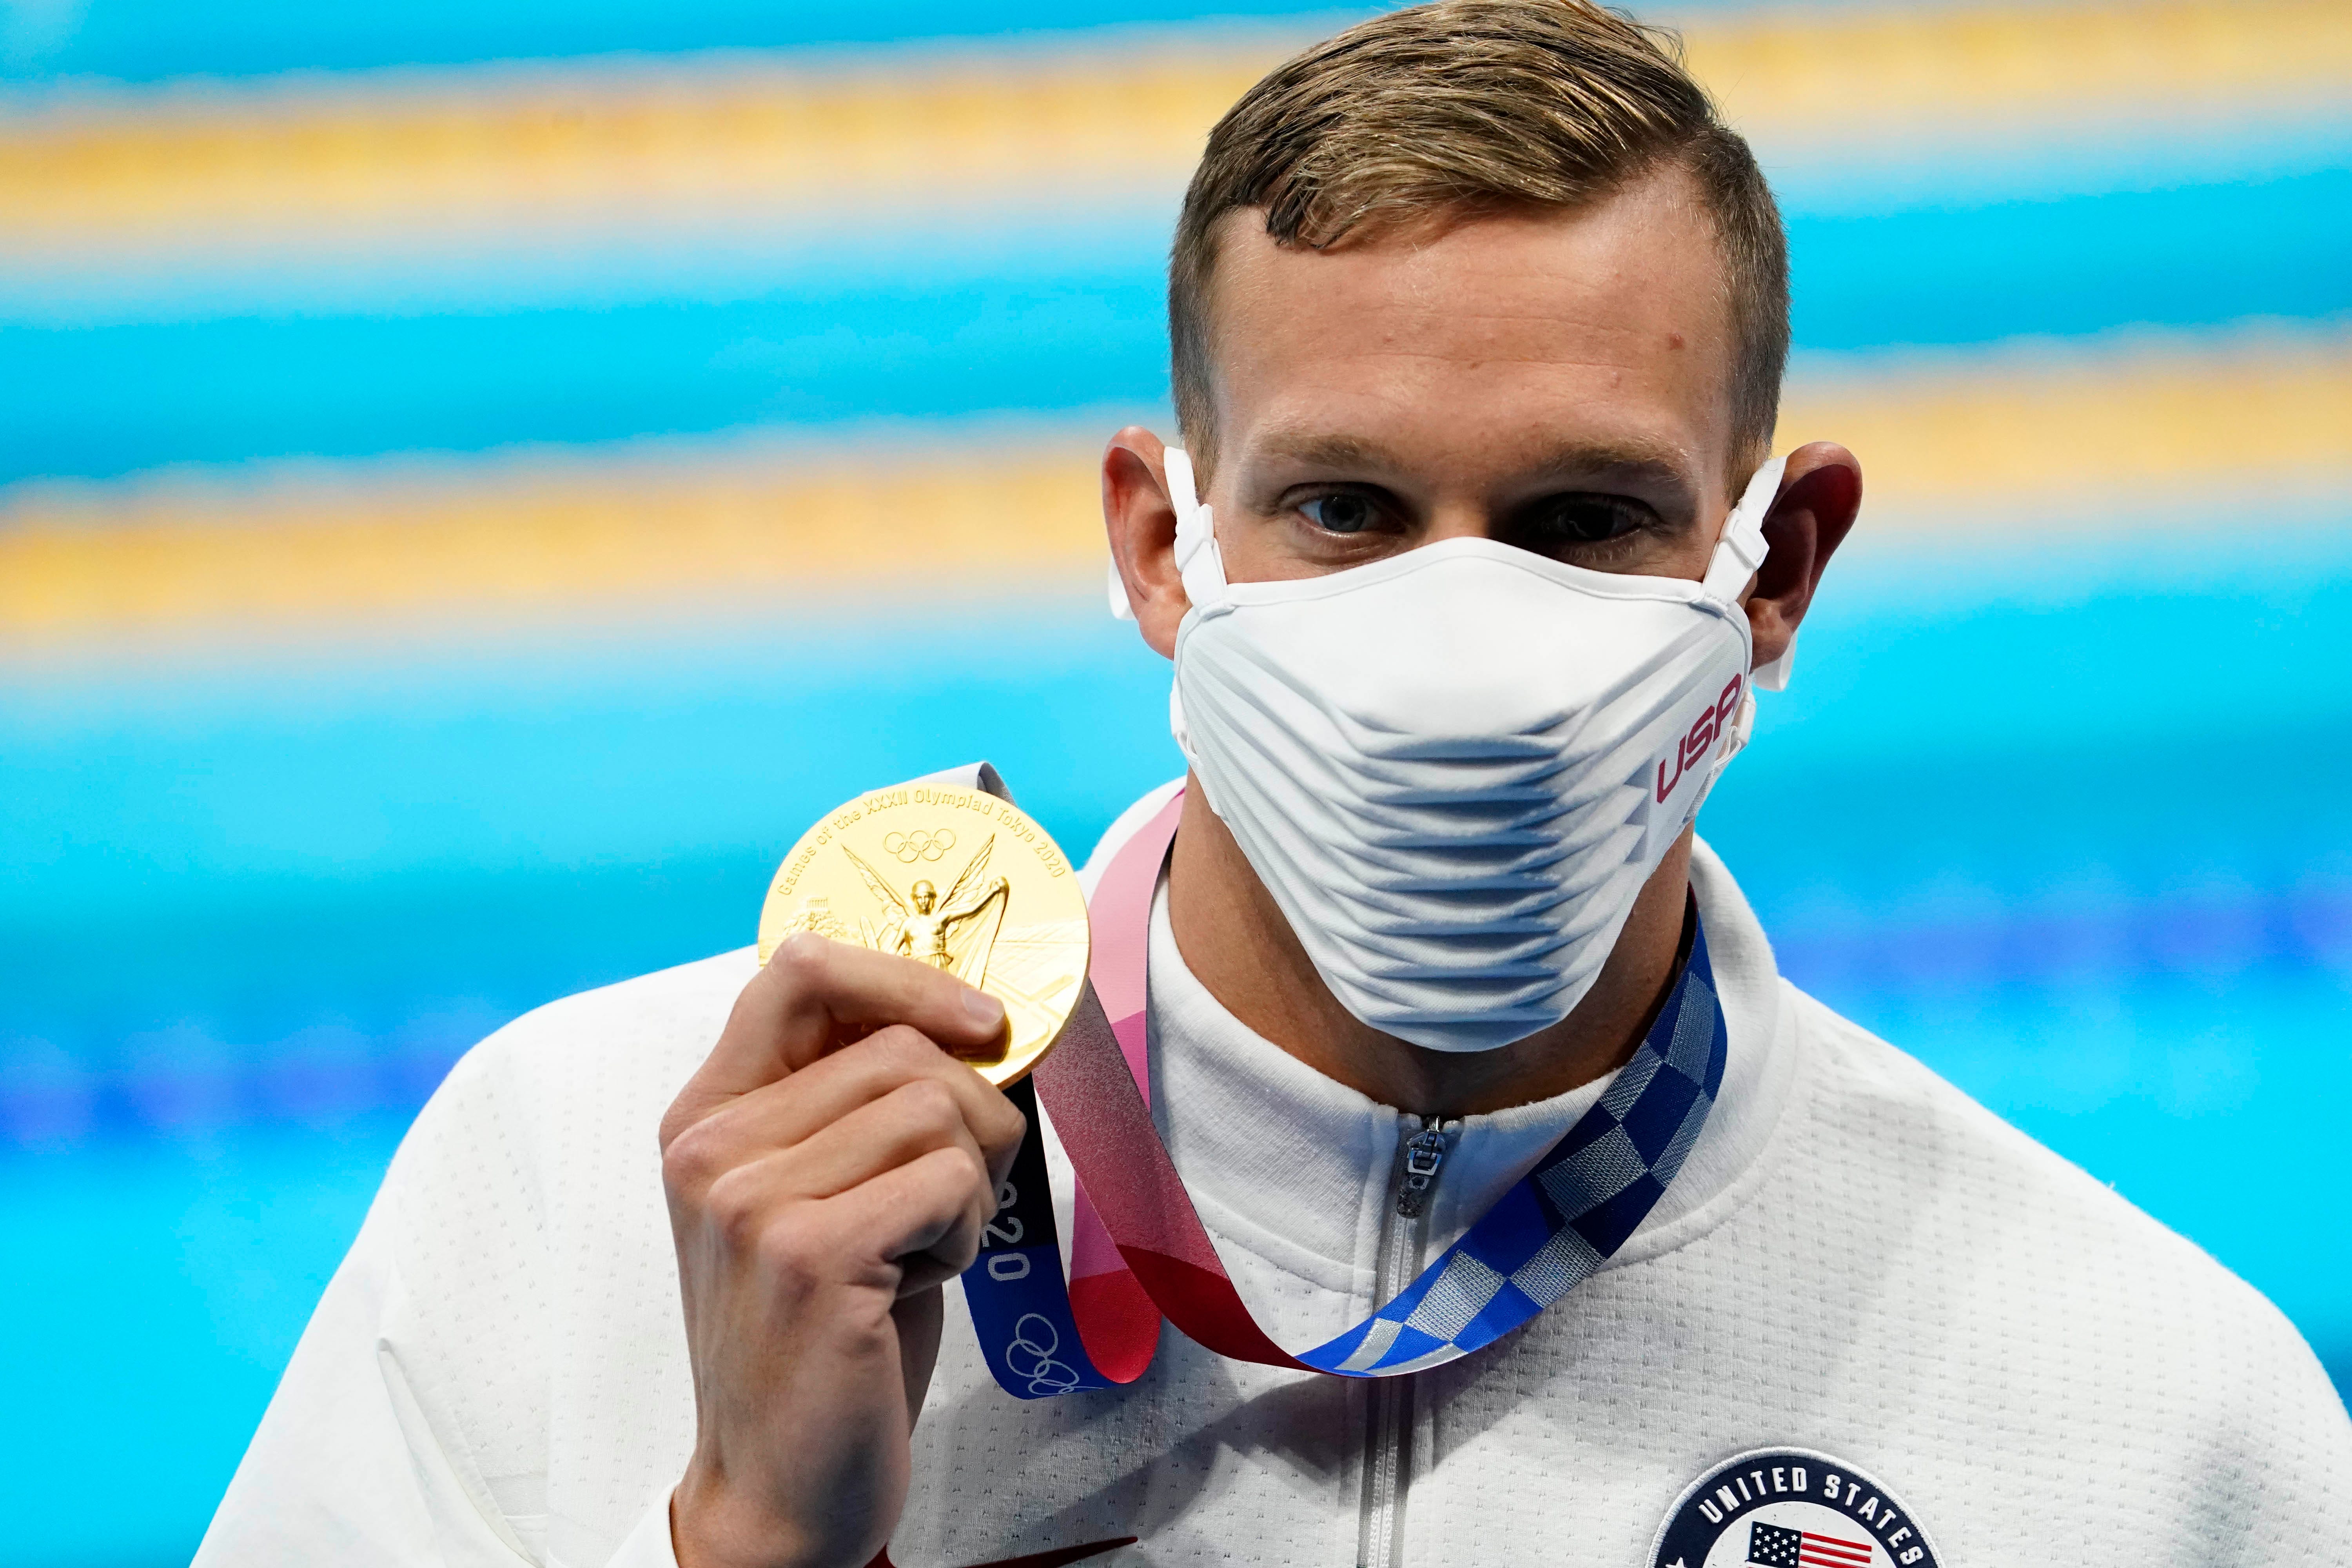 Caeleb Dressel (USA) with his gold medal during the medals ceremony for the men's 100m butterfly during the Tokyo 2020 Olympics.